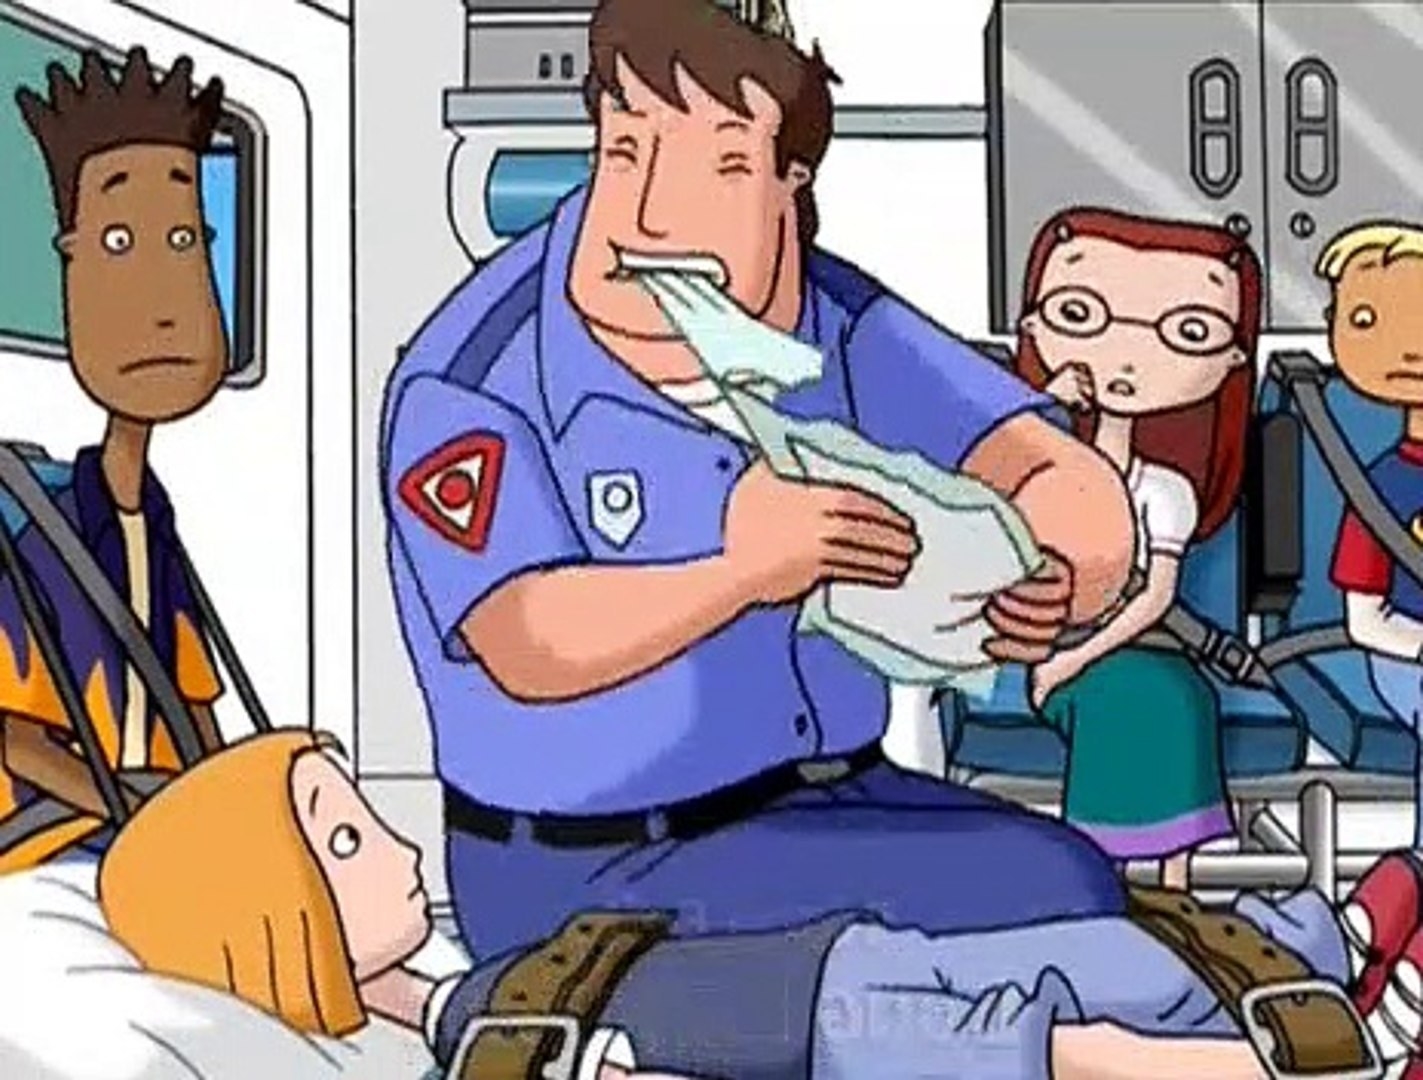 Lor is strapped to a gurney while a paramedic sits above her ripping open a white package with his teeth. Lor&#x27;s three friends sit around looking shocked.